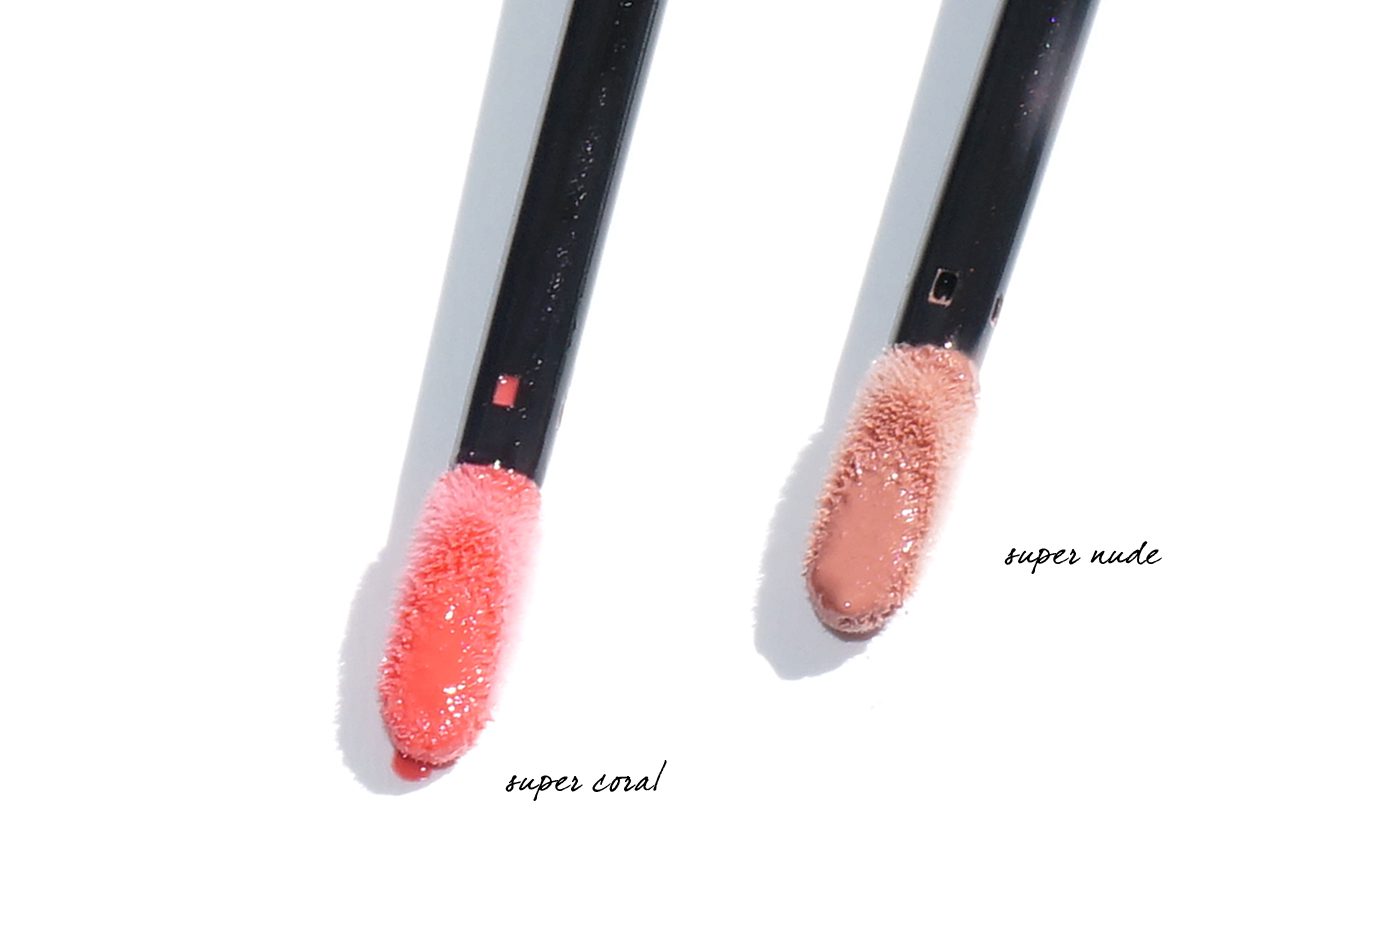 The Beauty Look Book - Chanel Rouge Allure Gloss Super Nude and Super Coral